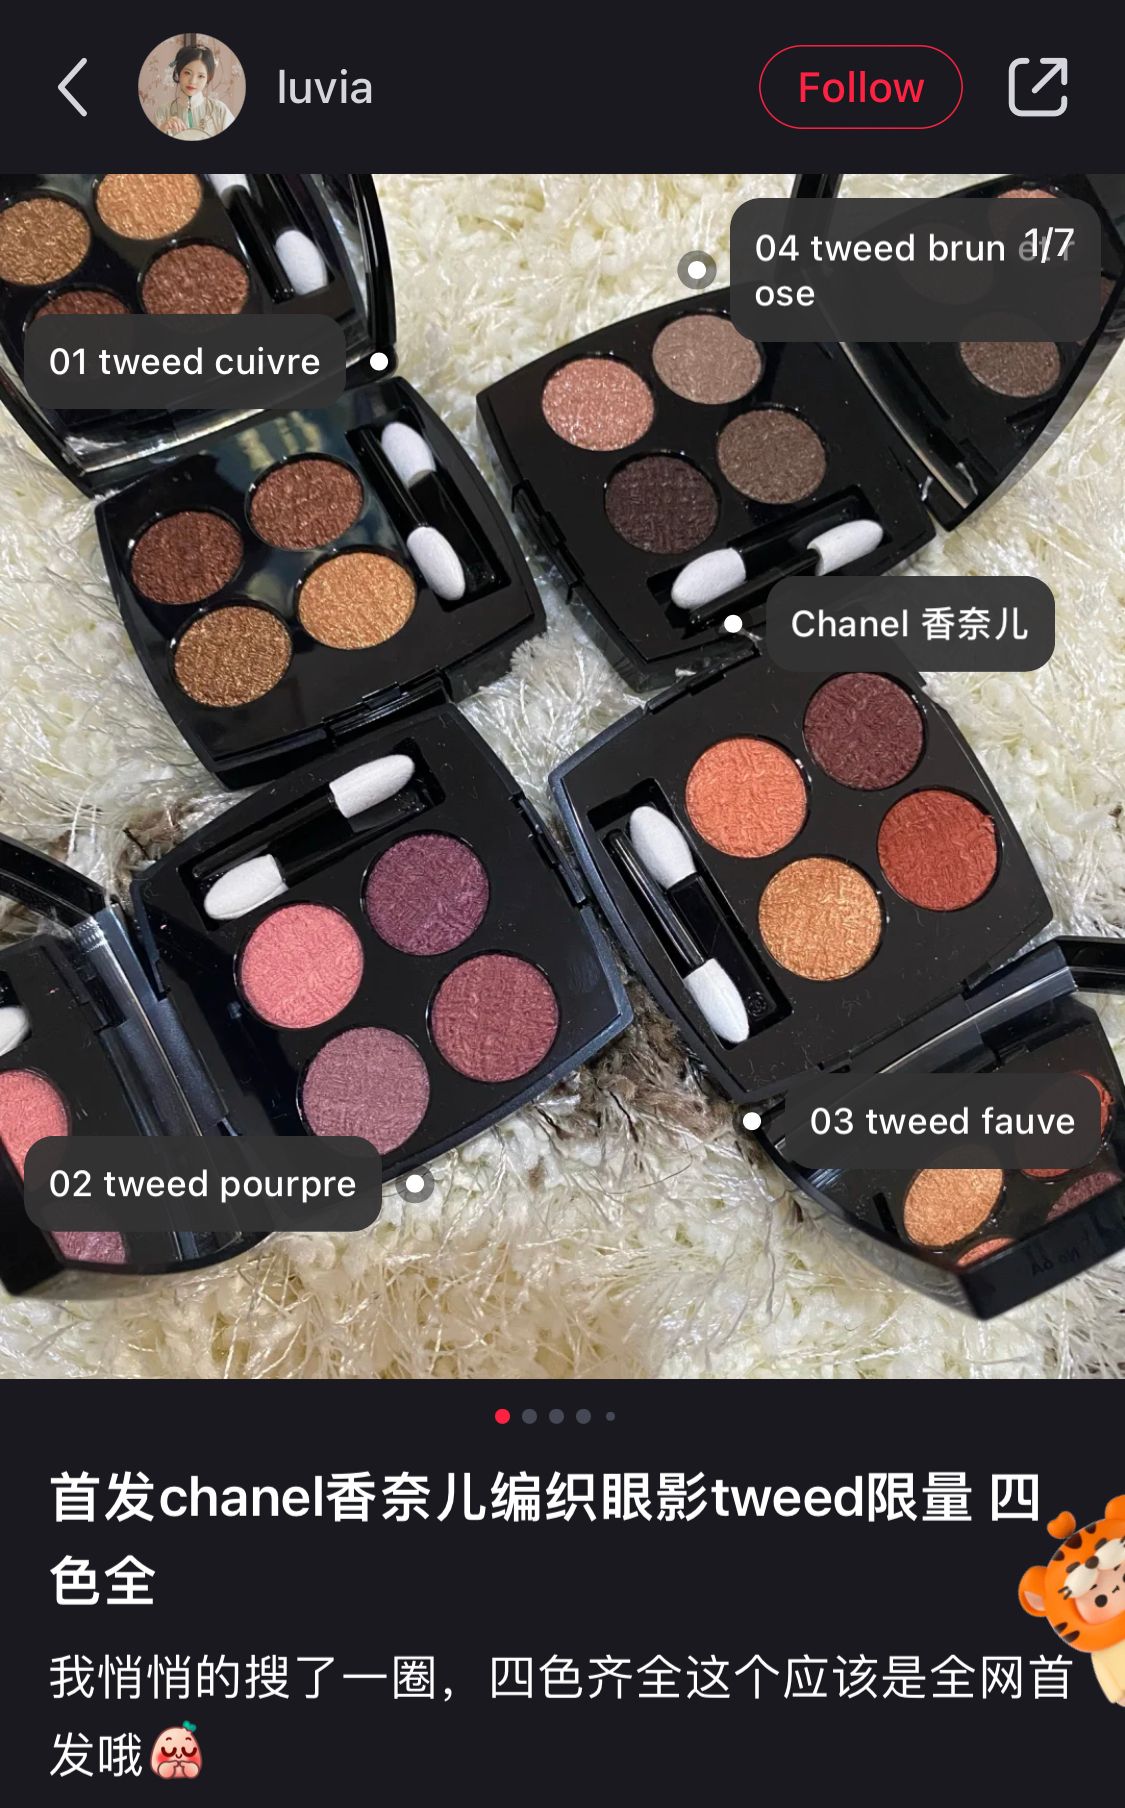 Re: Chanel Updates - Page 115 - Beauty Insider Community